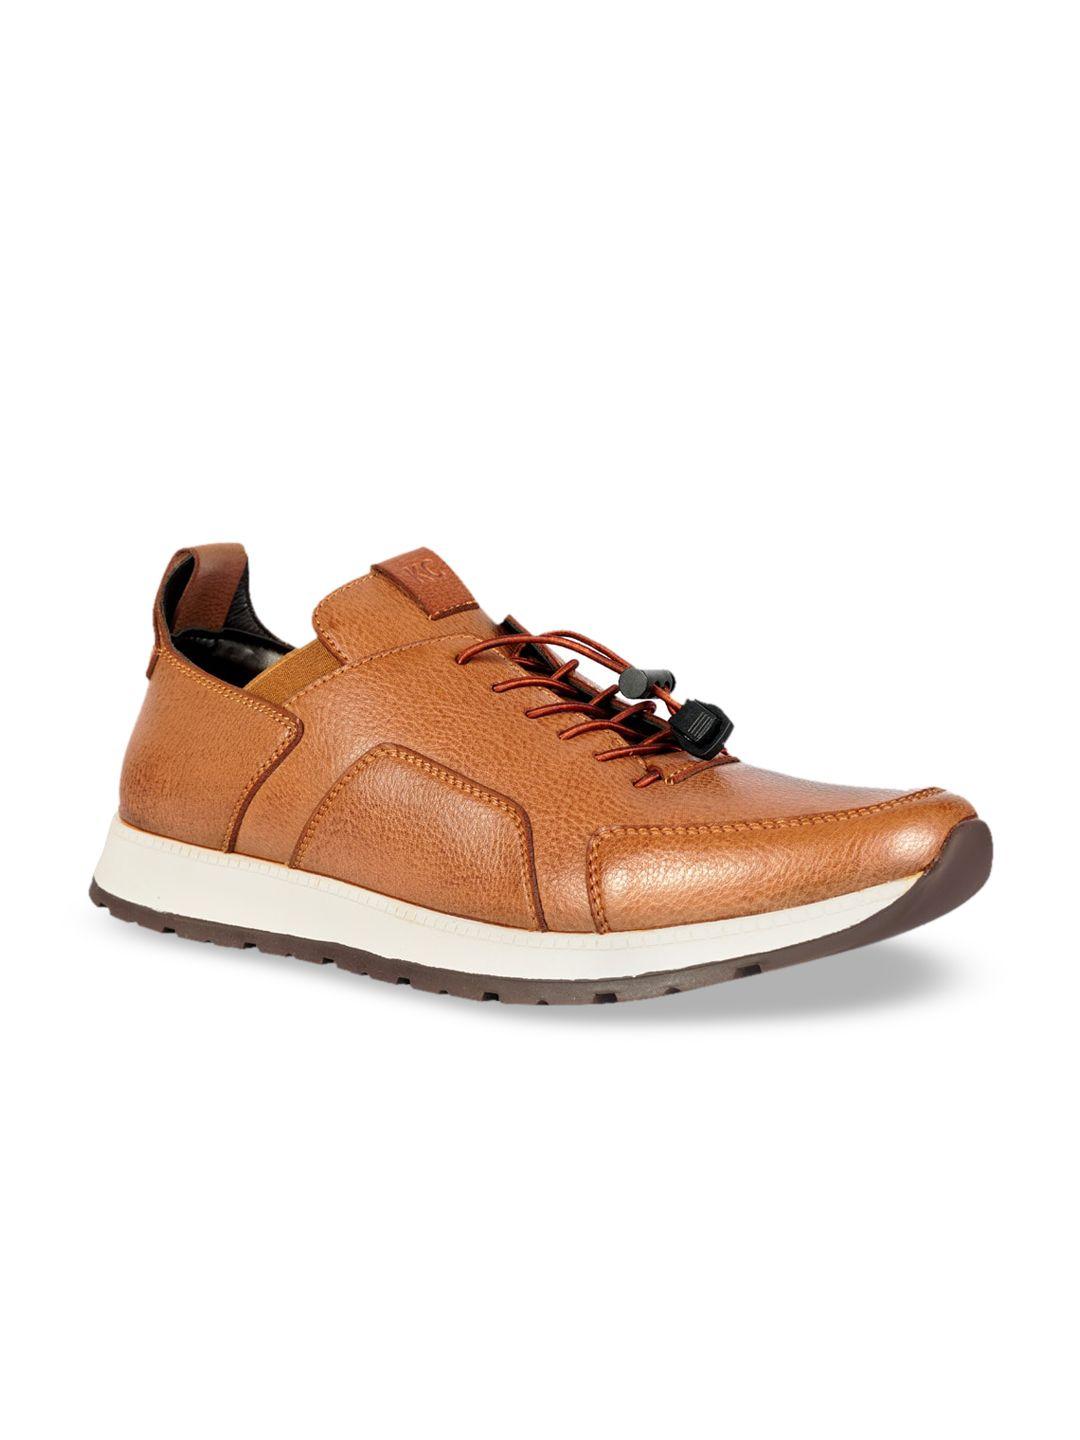 kenneth-cole-men-brown-solid-lightweight-leather-sneakers